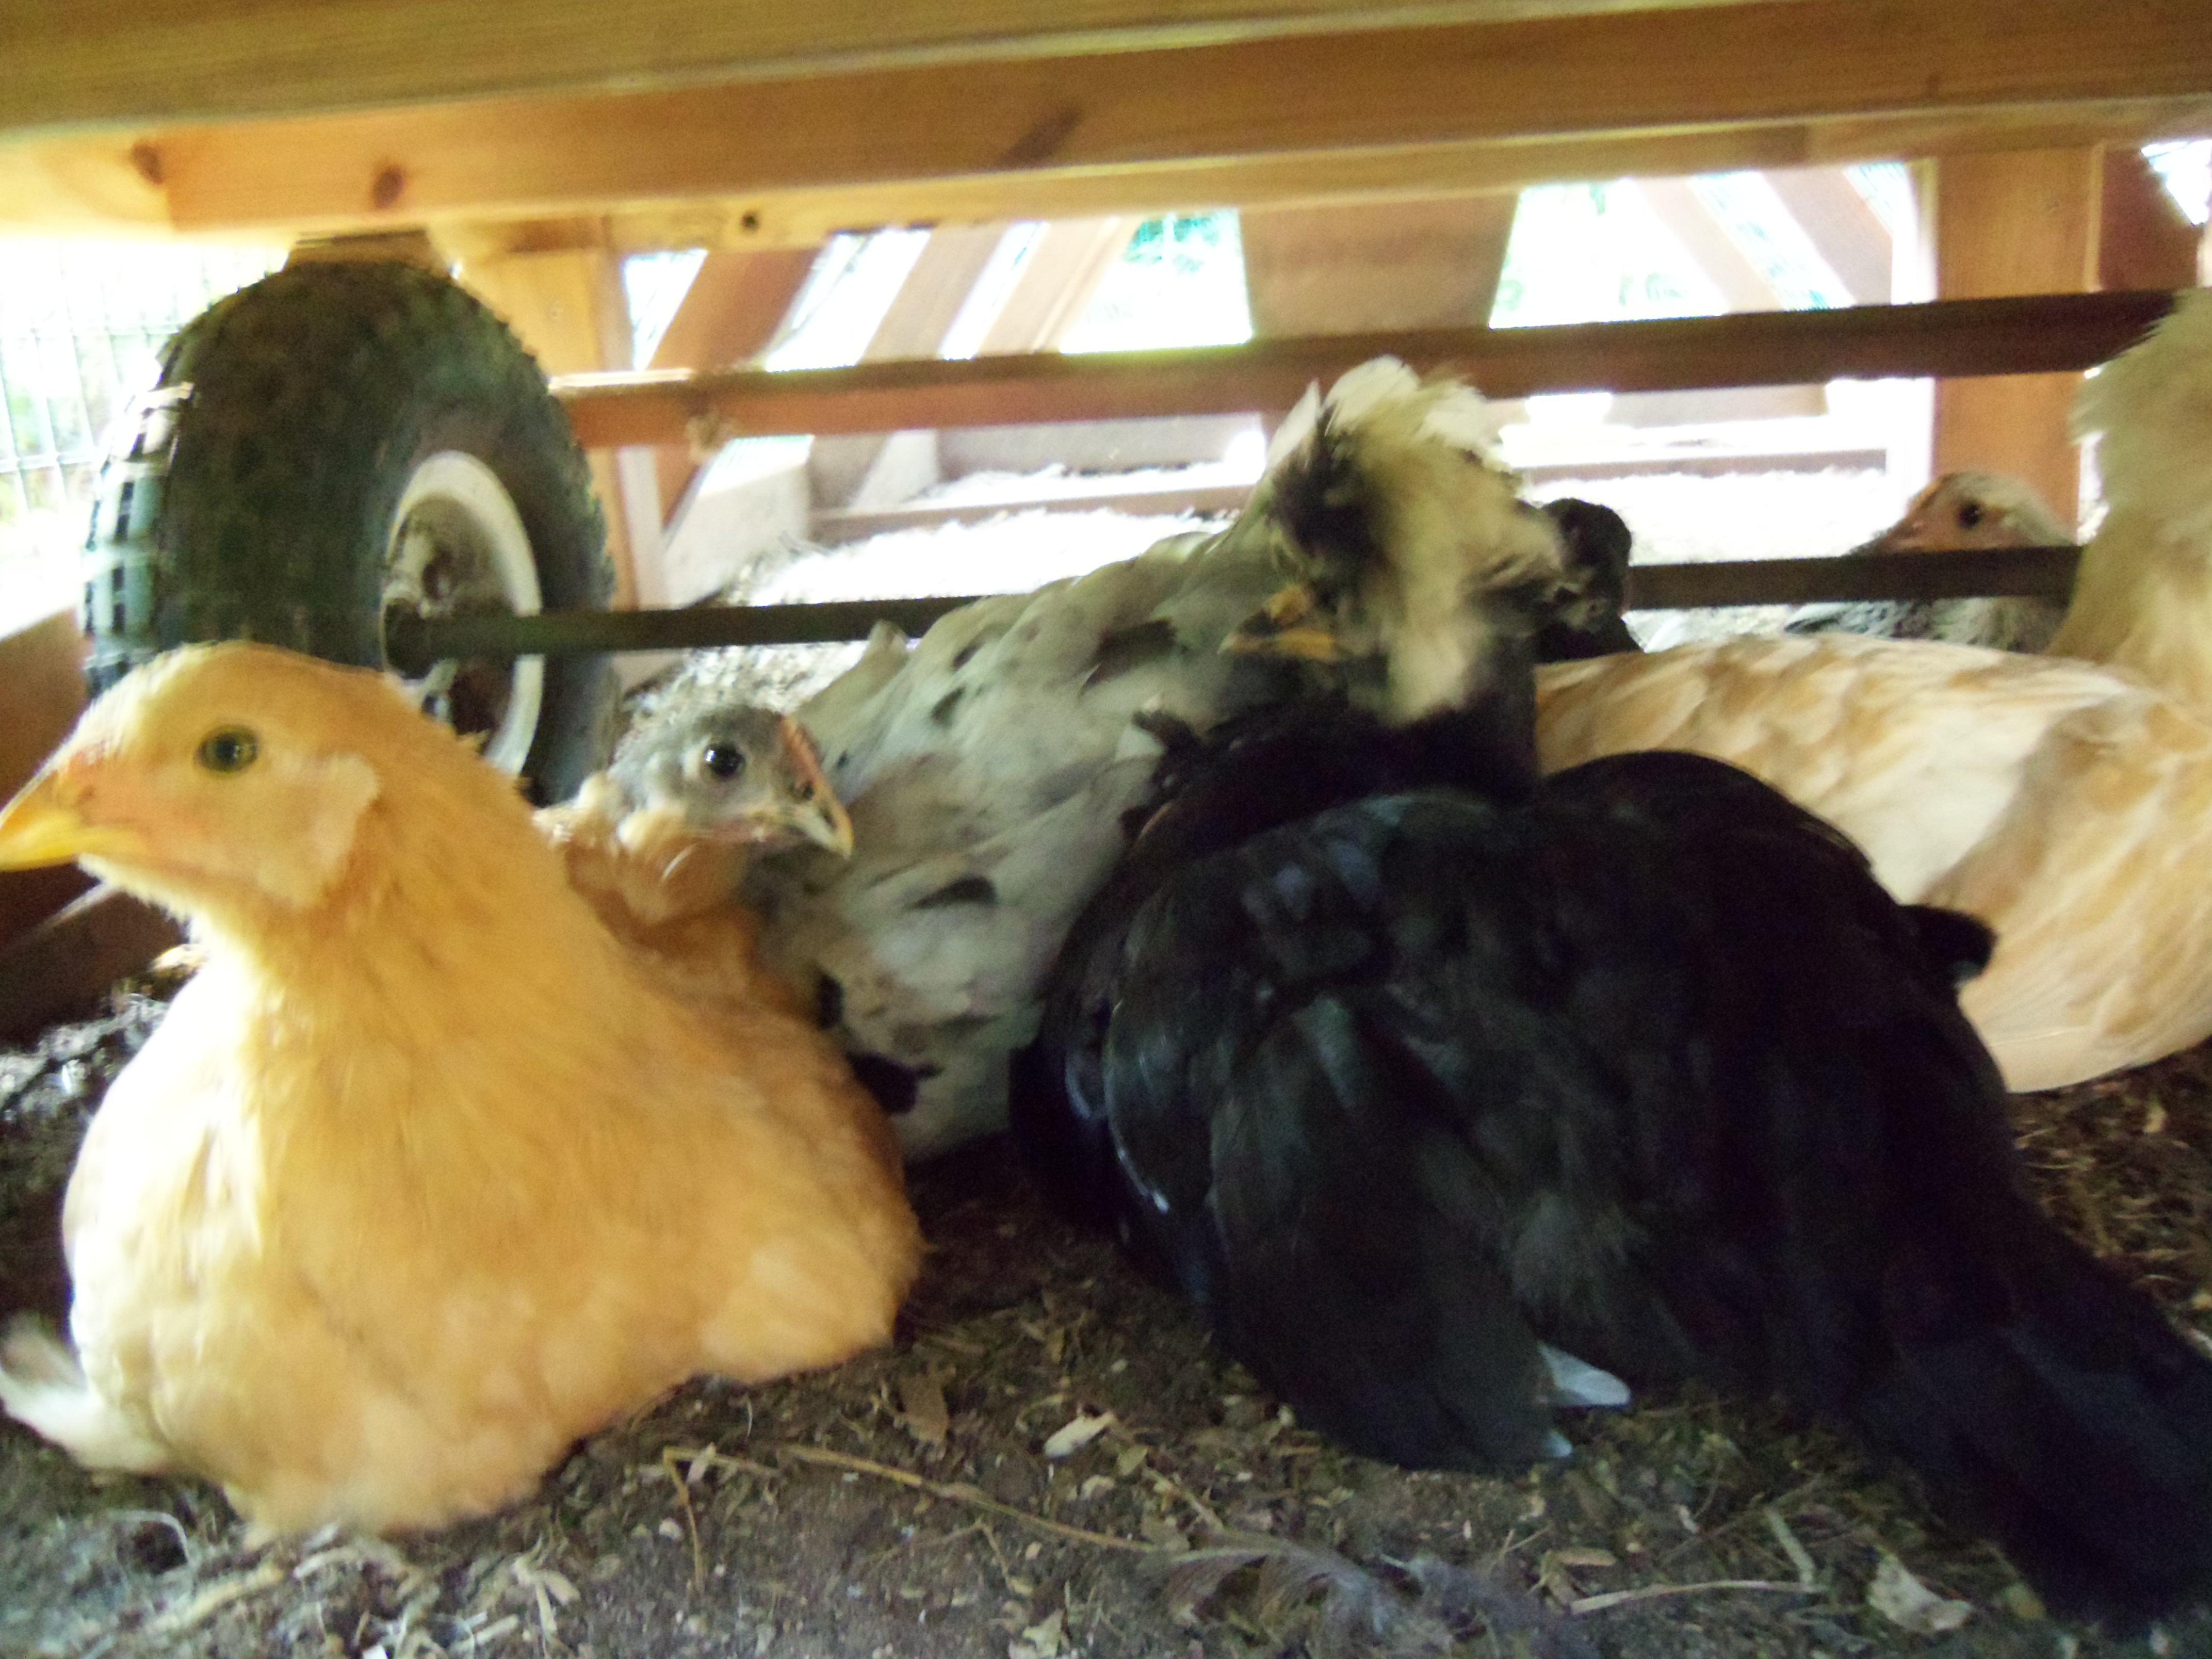 The baby flock all snuggled together under the coup!